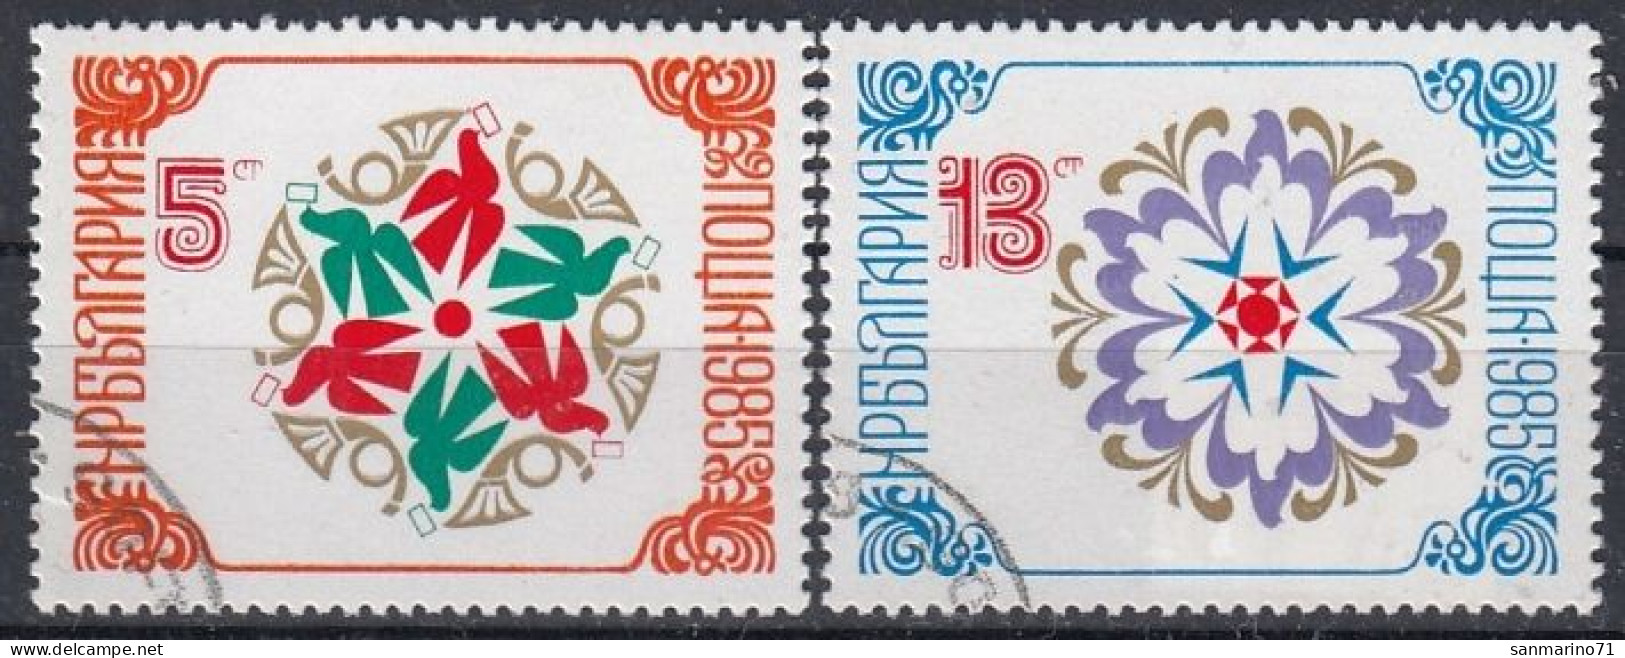 BULGARIA 3311-3312,used,falc Hinged - Used Stamps